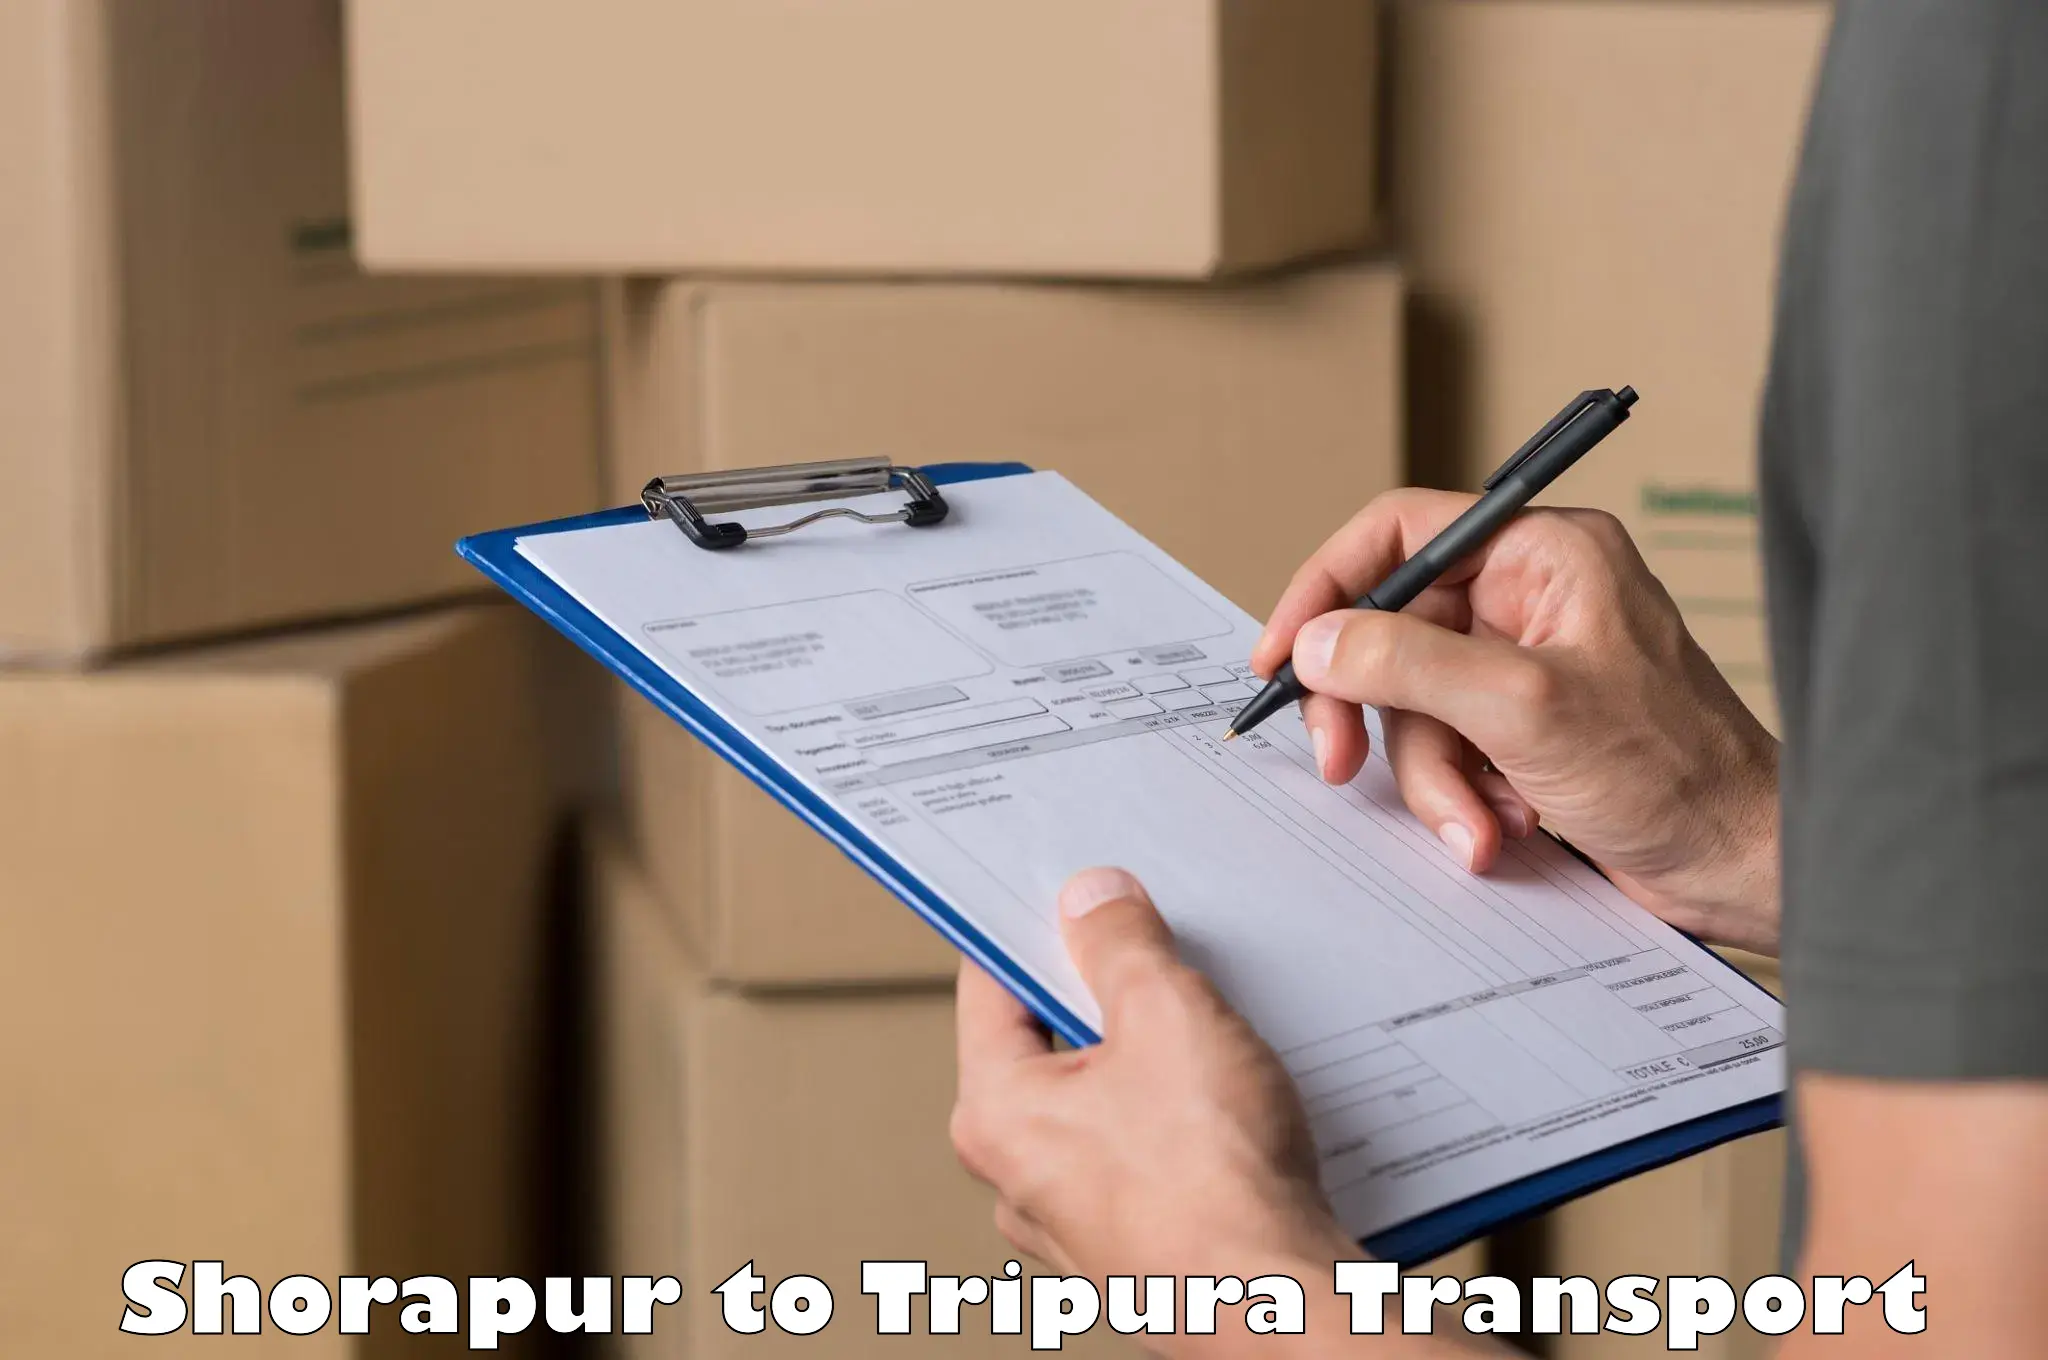 Transport shared services in Shorapur to Udaipur Tripura